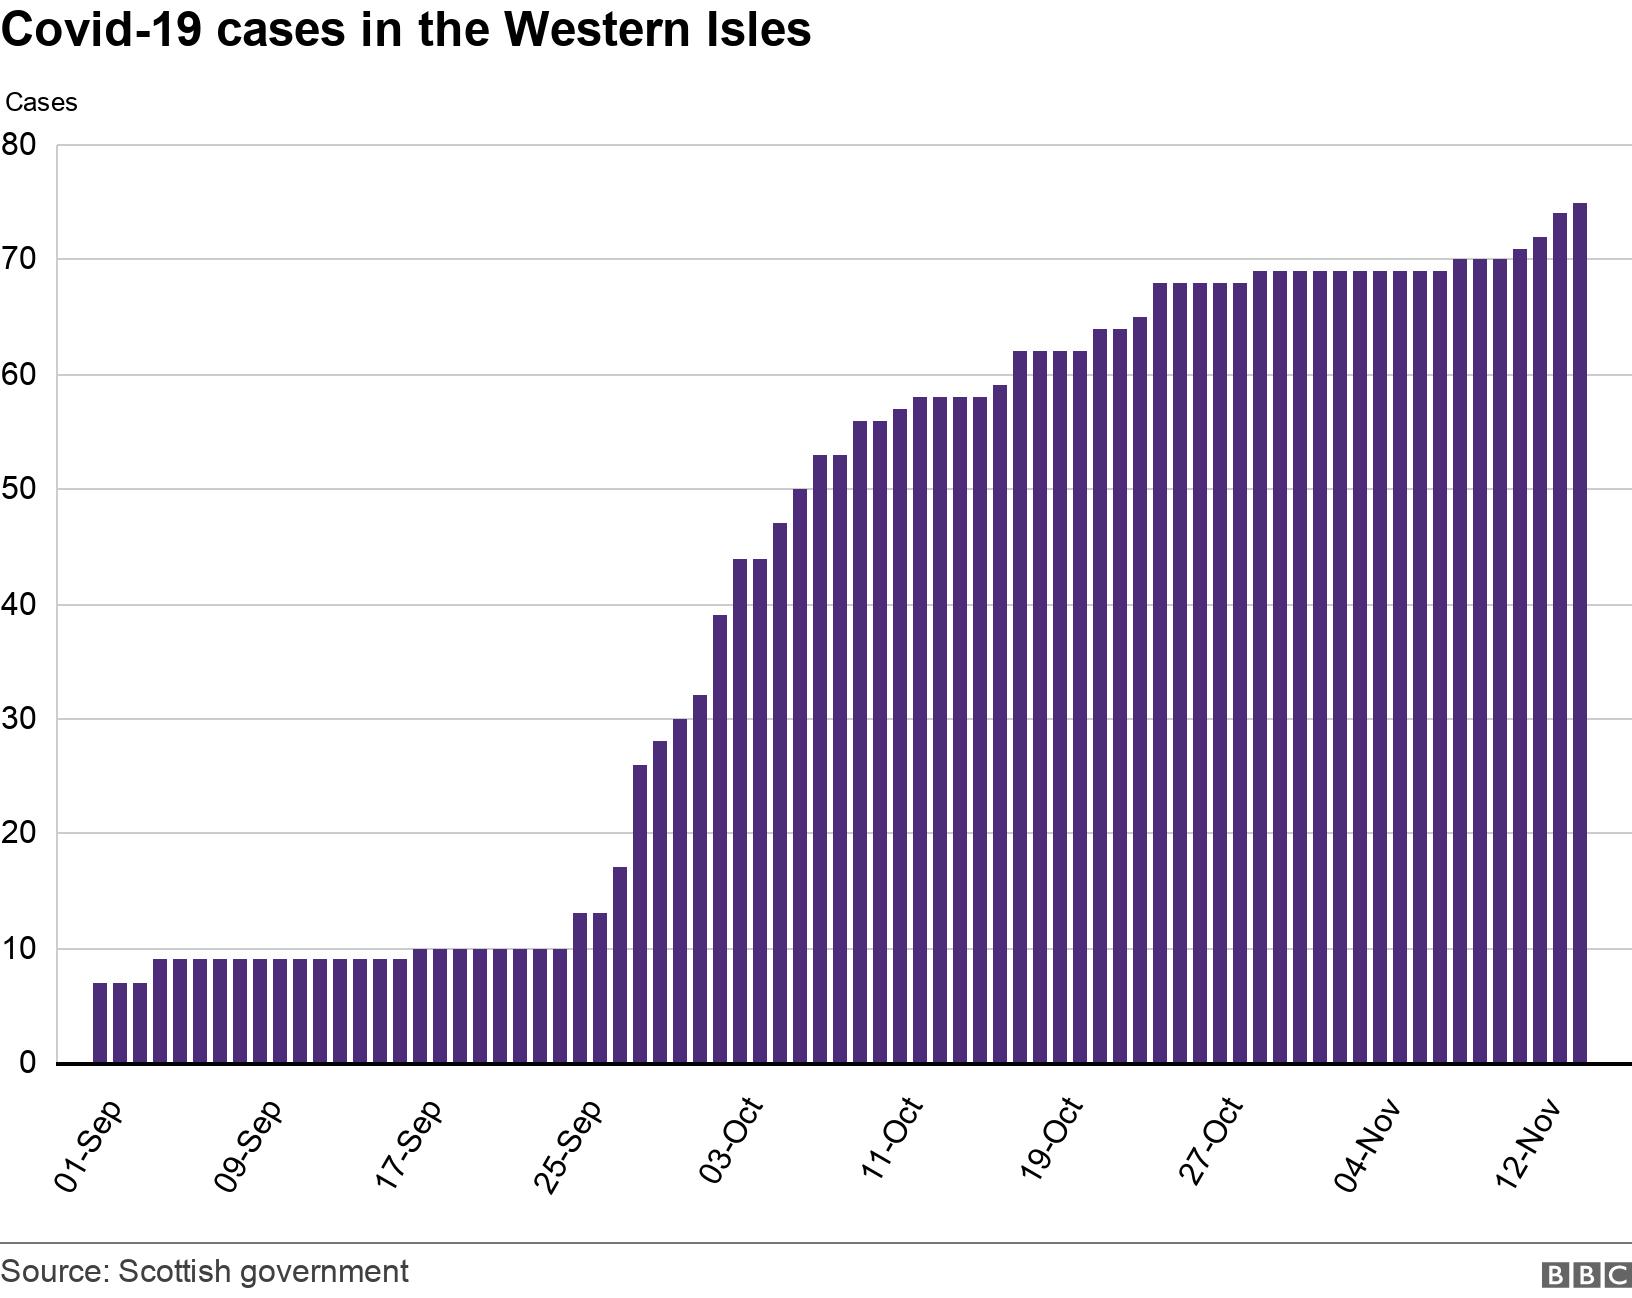 Covid-19 cases in the Western Isles. . .